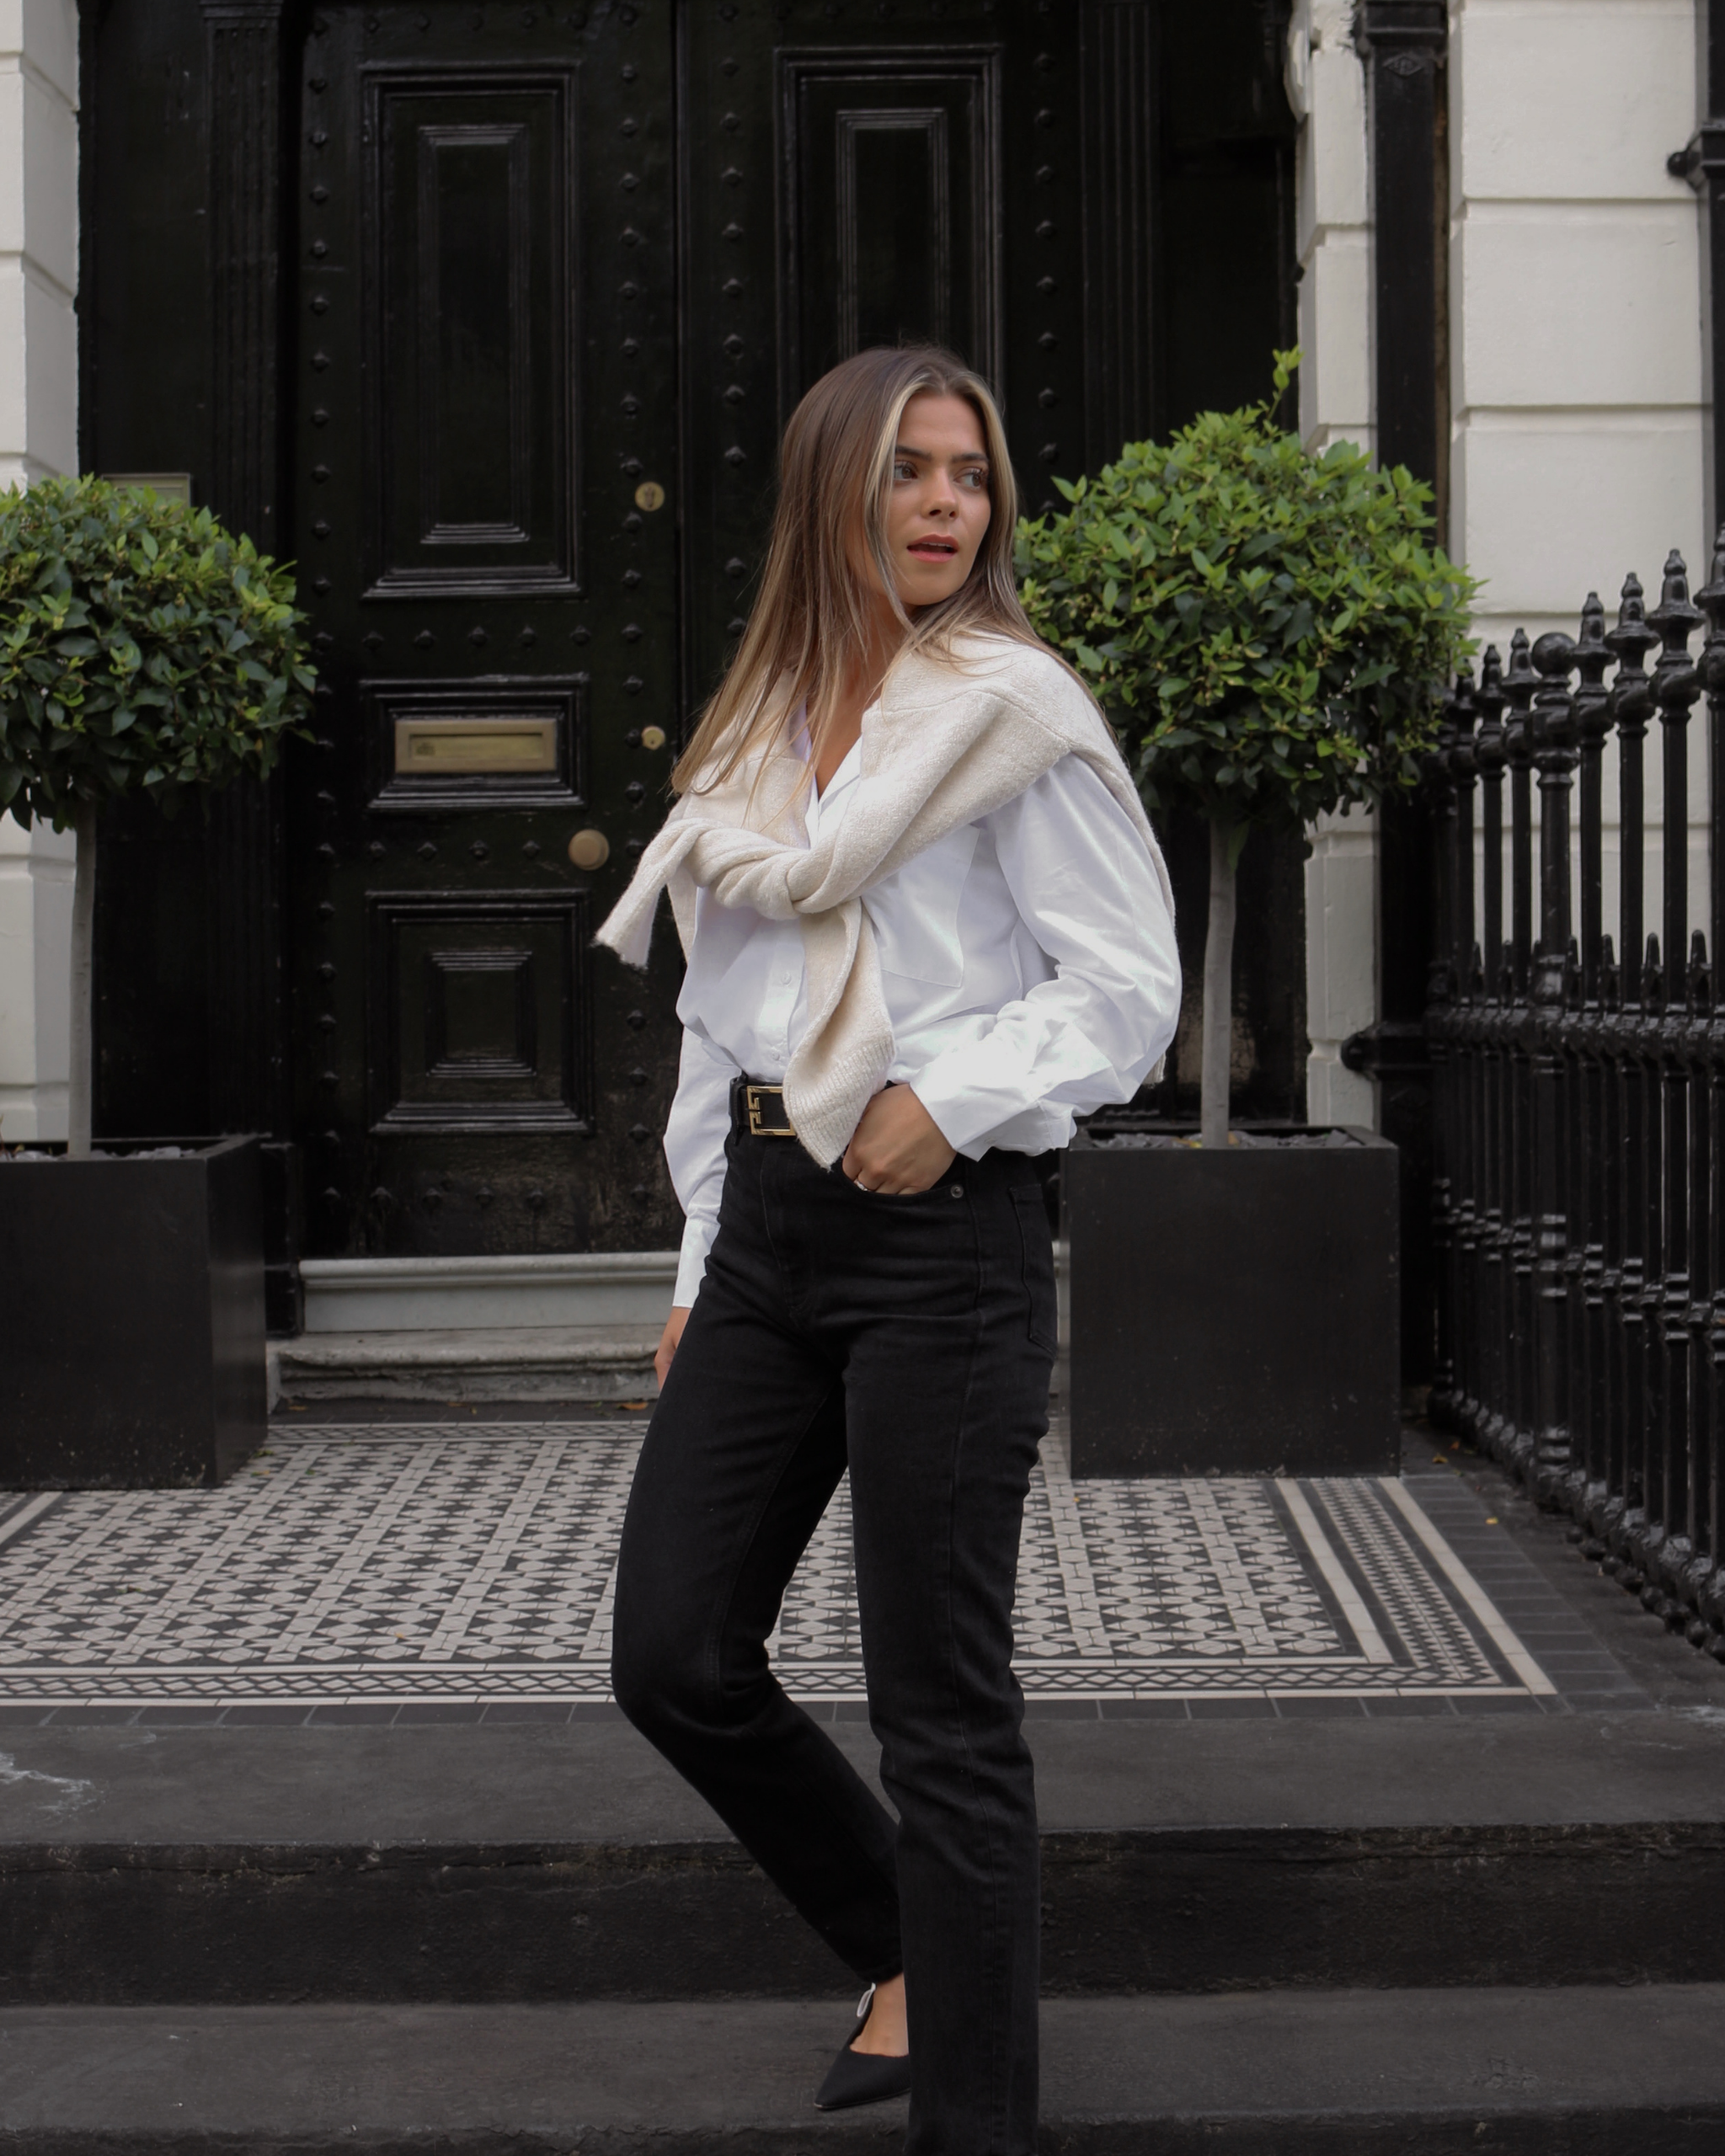 5 Black Jeans Outfits: What to Wear For Every Style